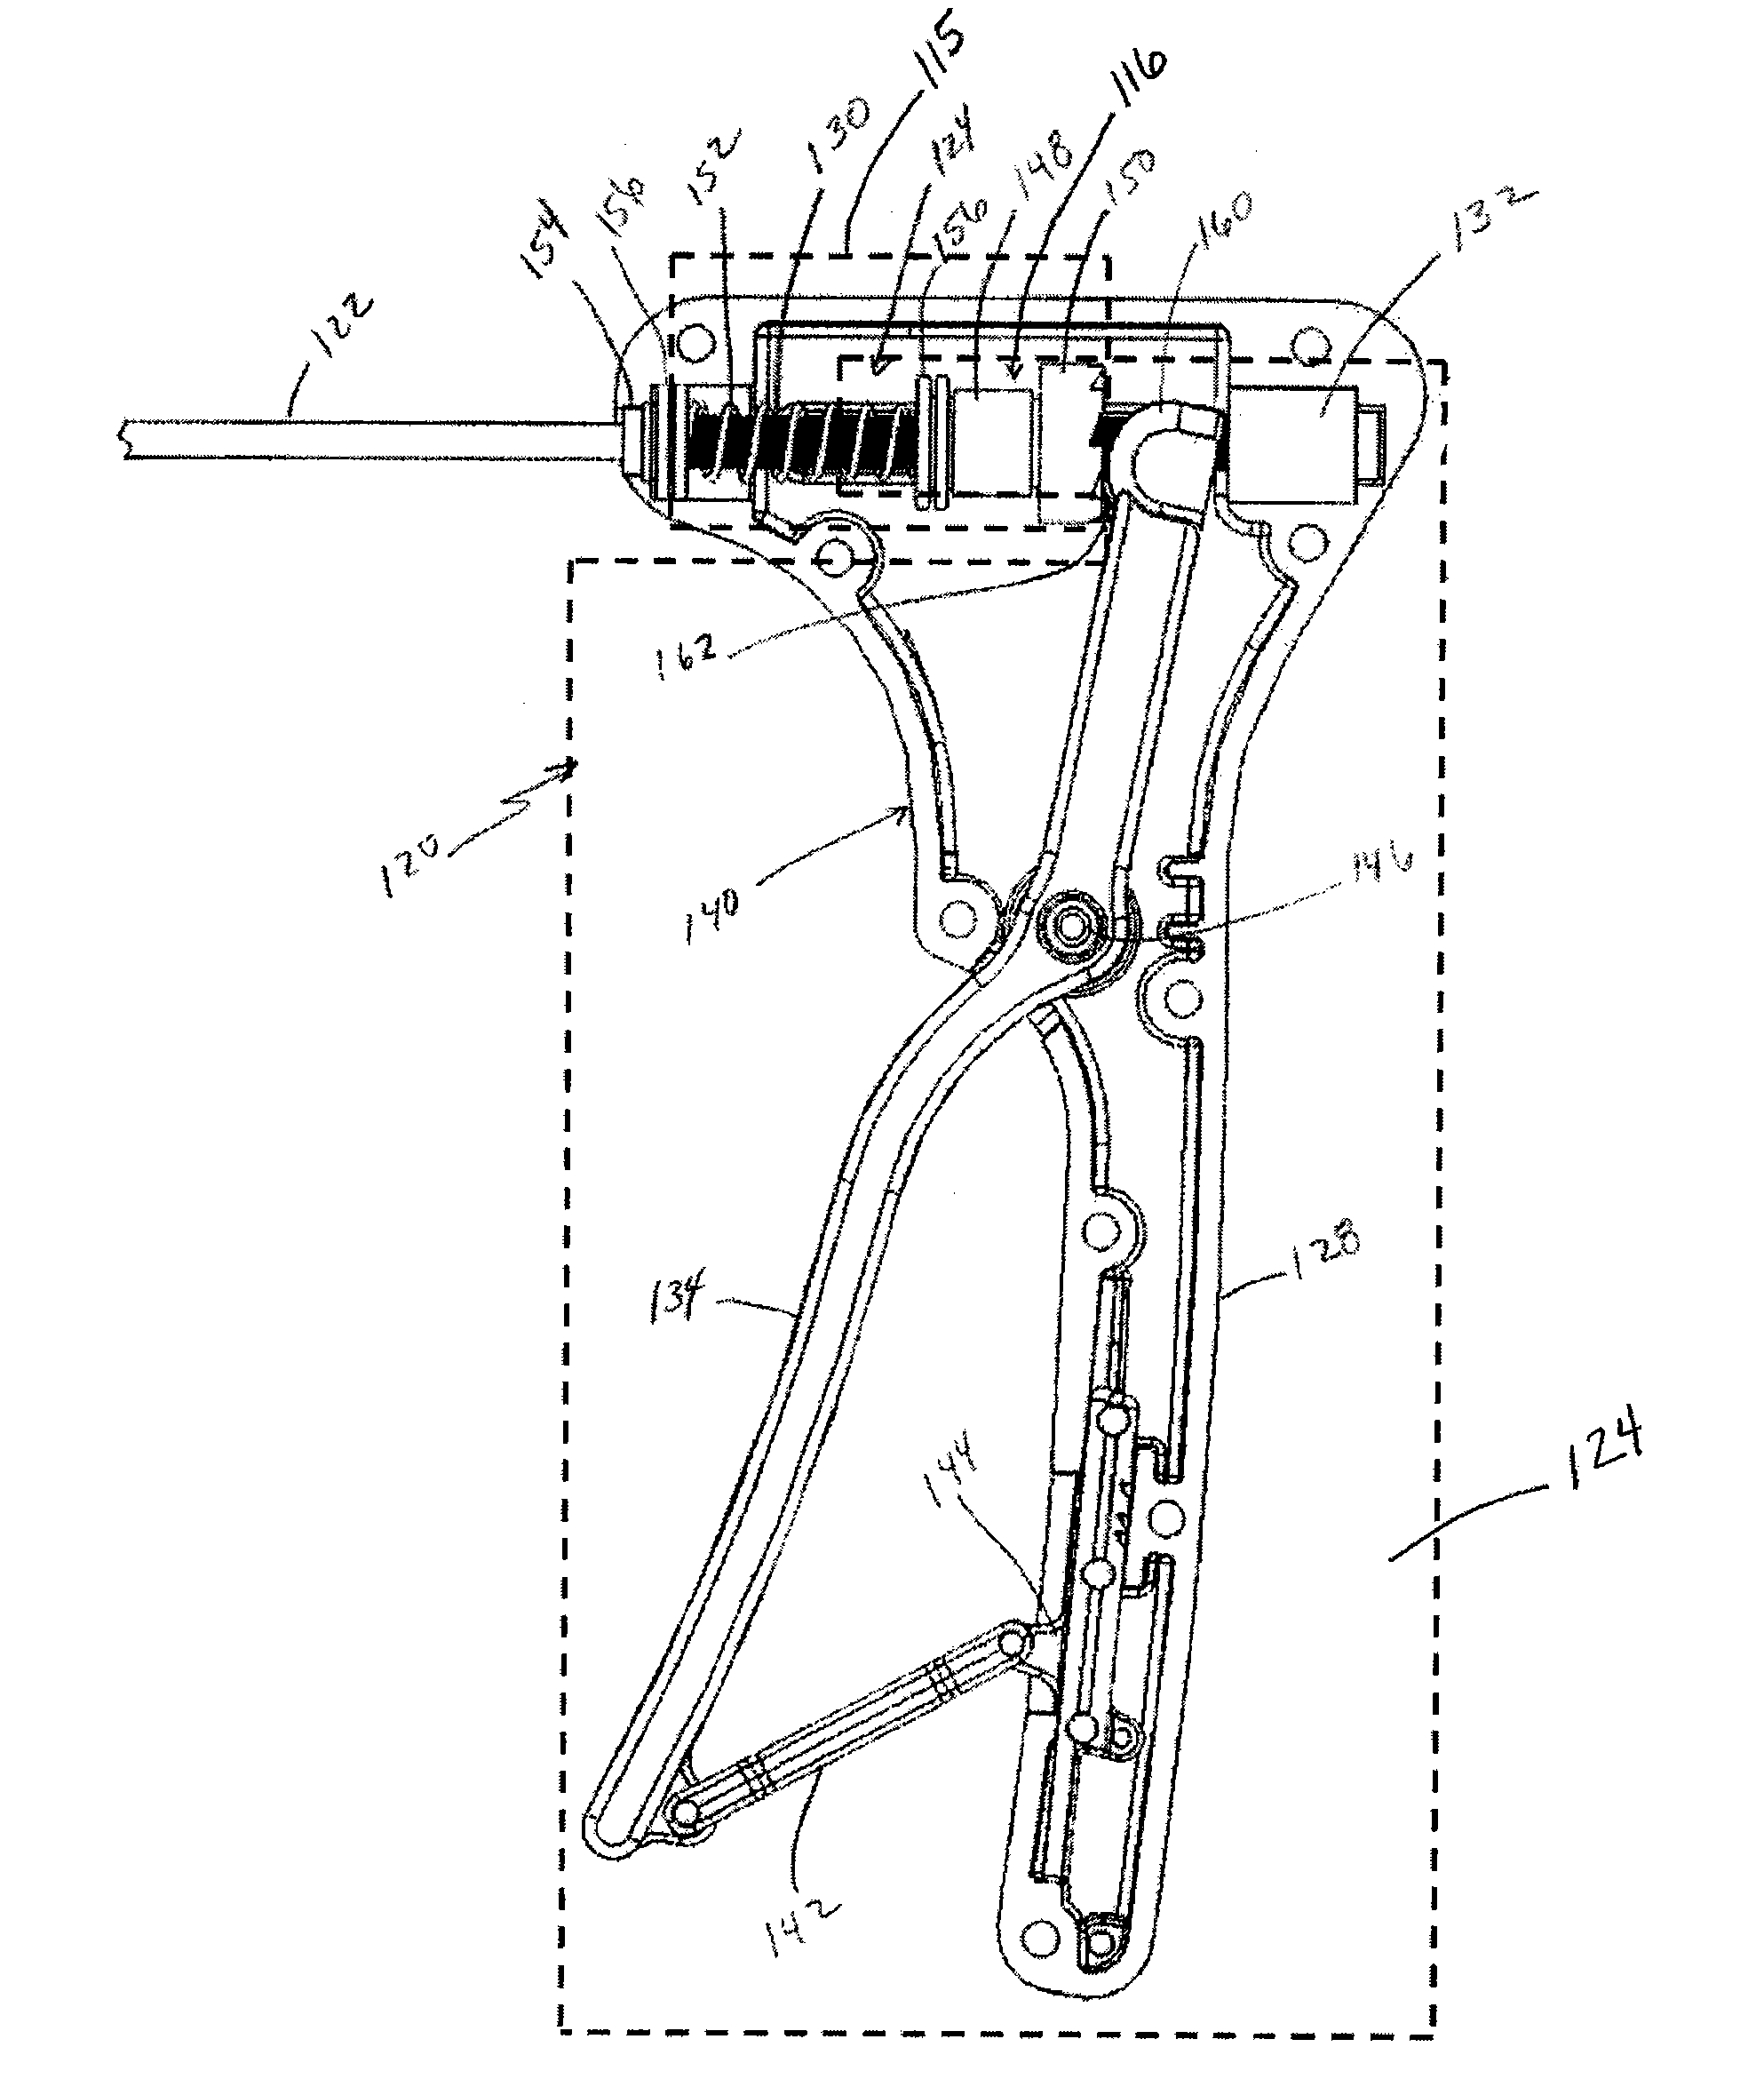 Medical device with one-way rotary drive mechanism